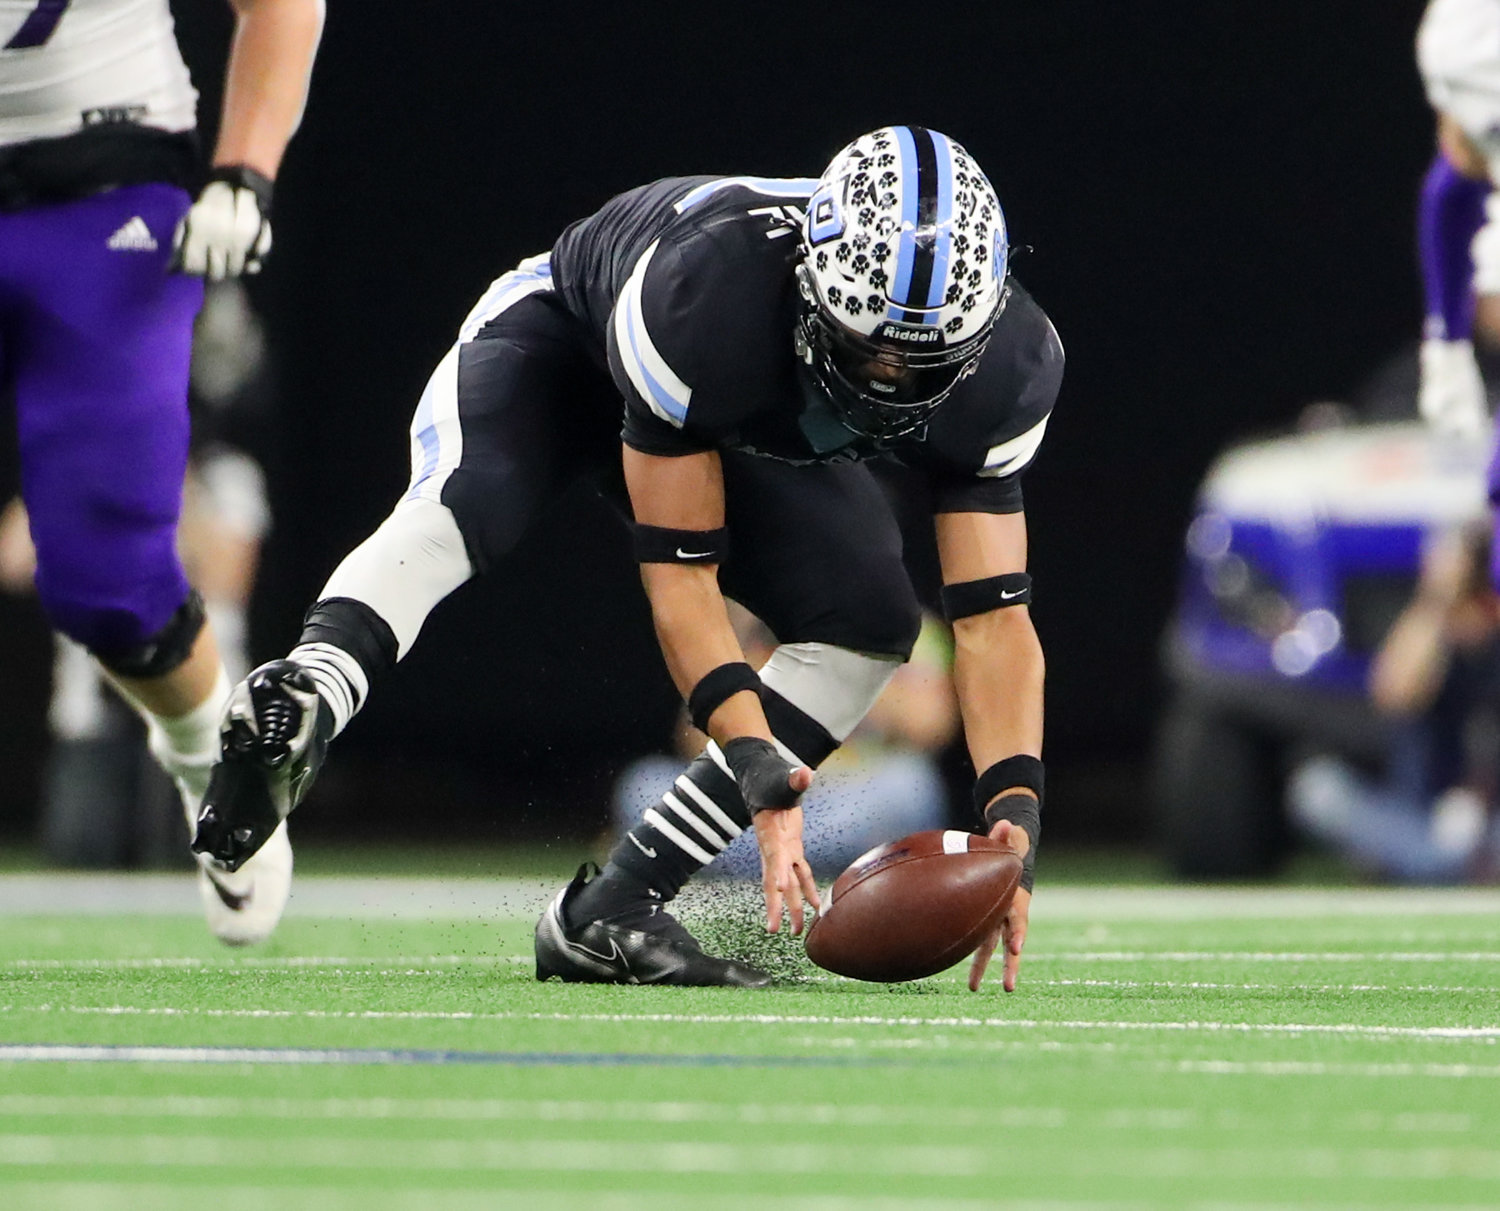 Paetow Panthers linebacker Alex Kilgore (46) picks up and returns a fumble after a strip sack during the Class 5A Division I state football championship game between Paetow and College Station on December 17, 2021 in Arlington, Texas.